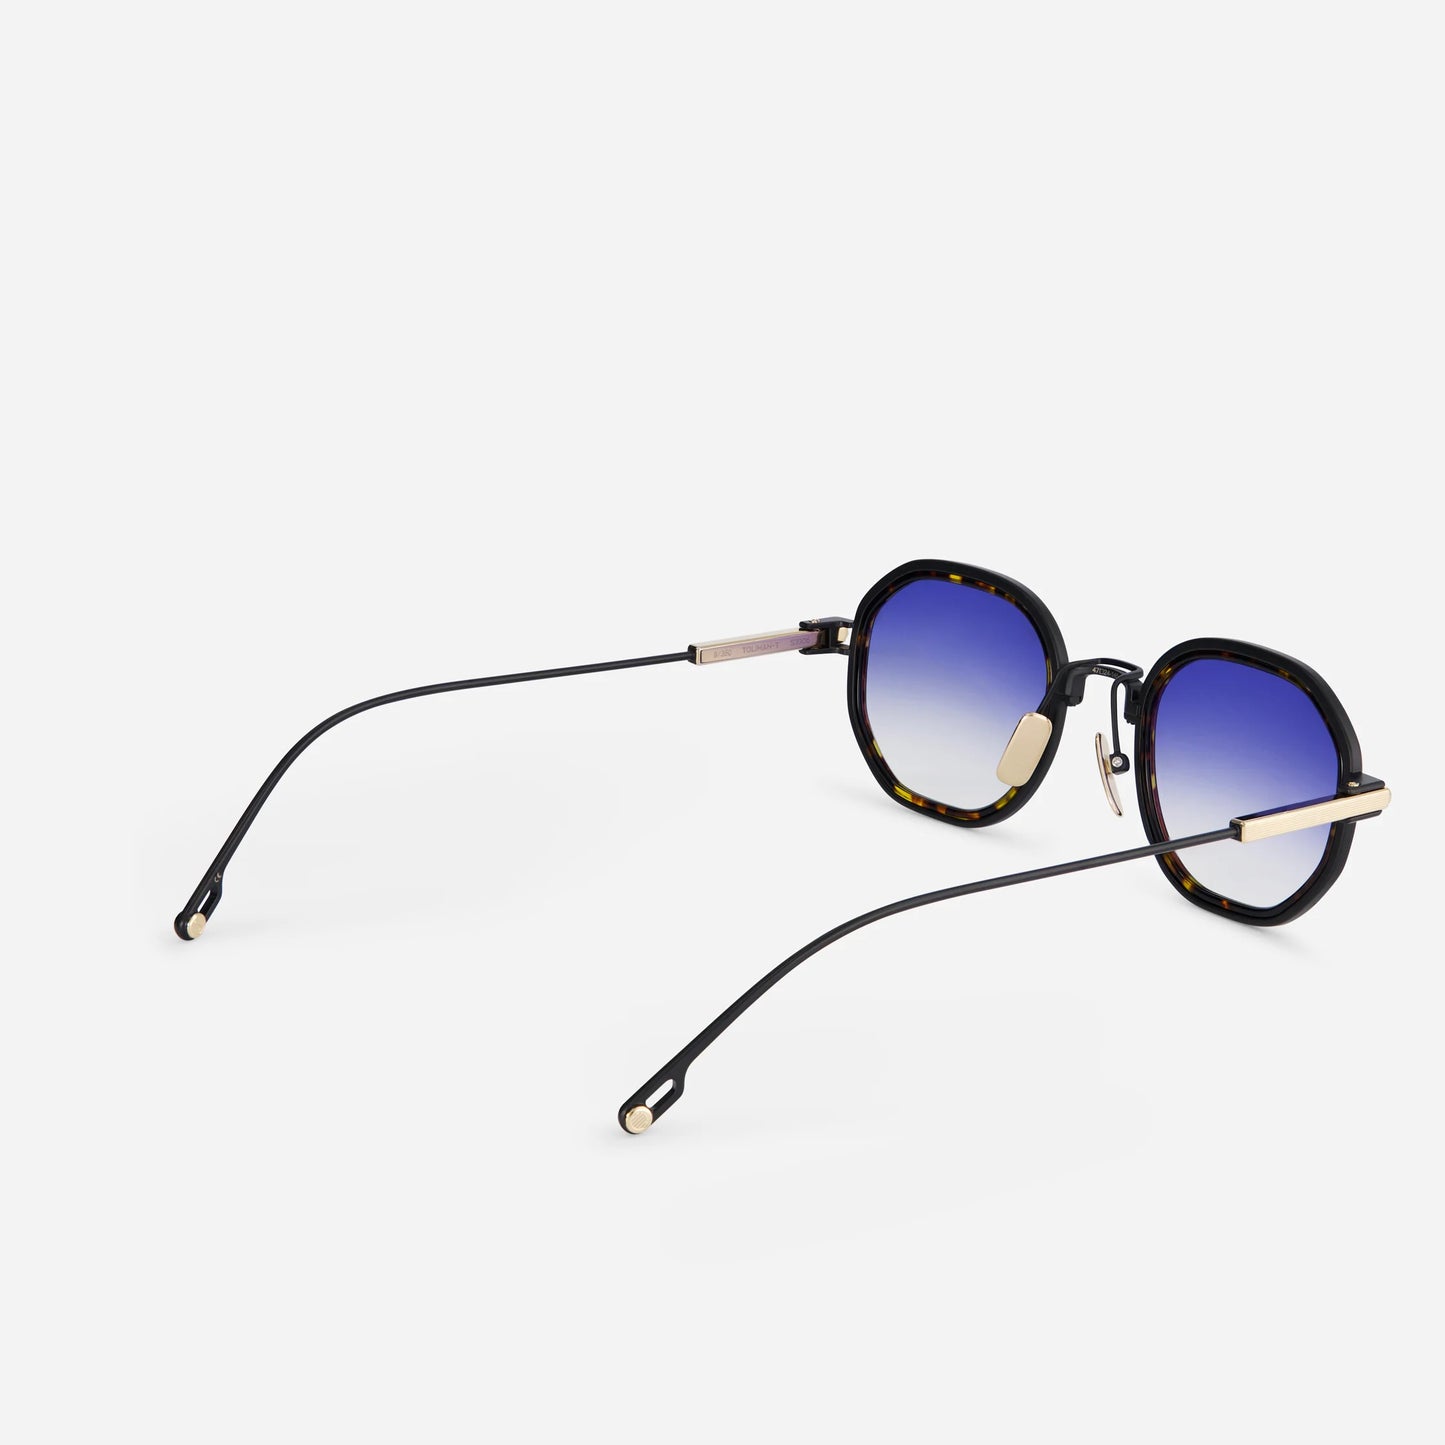 Toliman-T S3306 hexagonal sunglasses. Made from pure black titanium, these exquisite eyewear pieces feature dark blue gradient lenses and a stylish tortoise takiron rim insert.